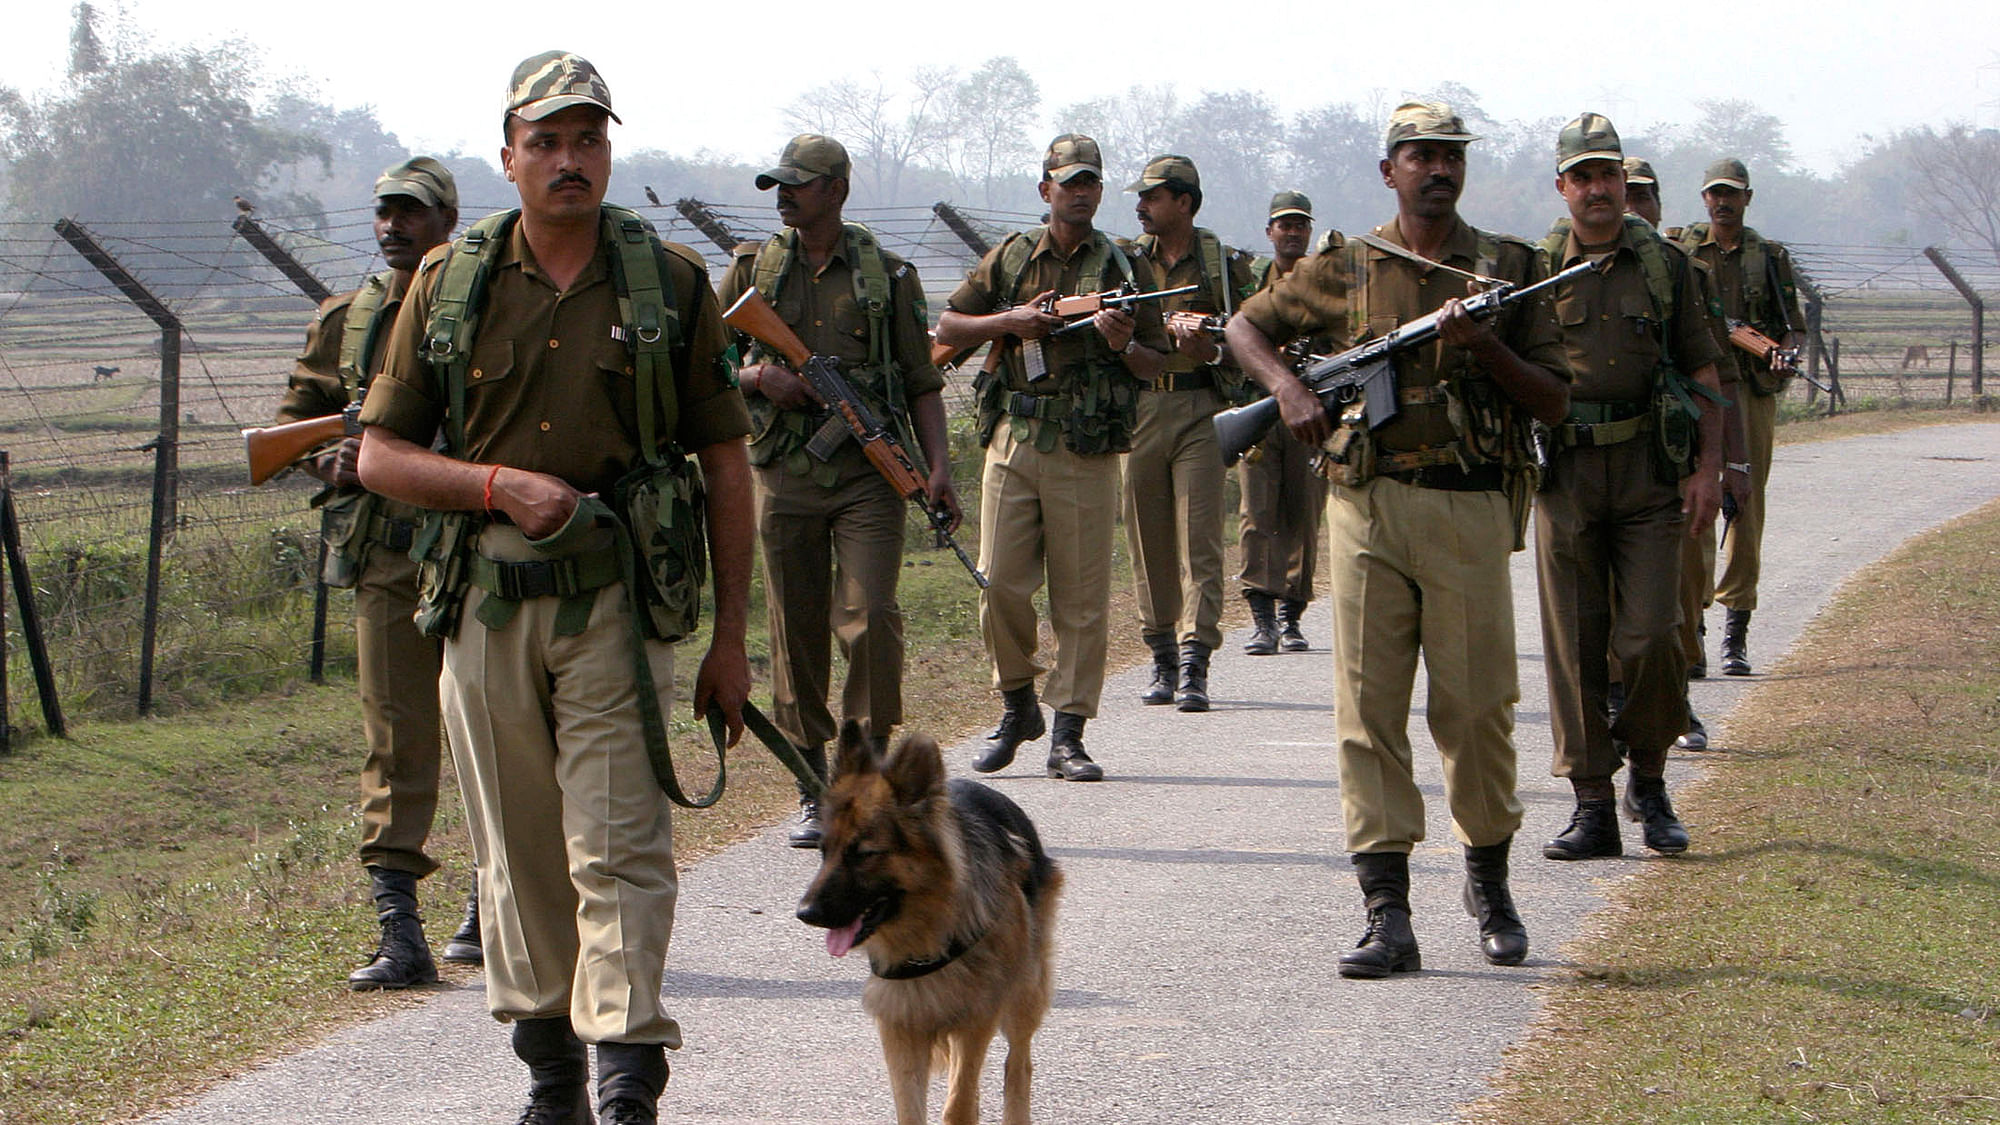 File photo of the Indian Border Security Force. (Photo: Reuters)